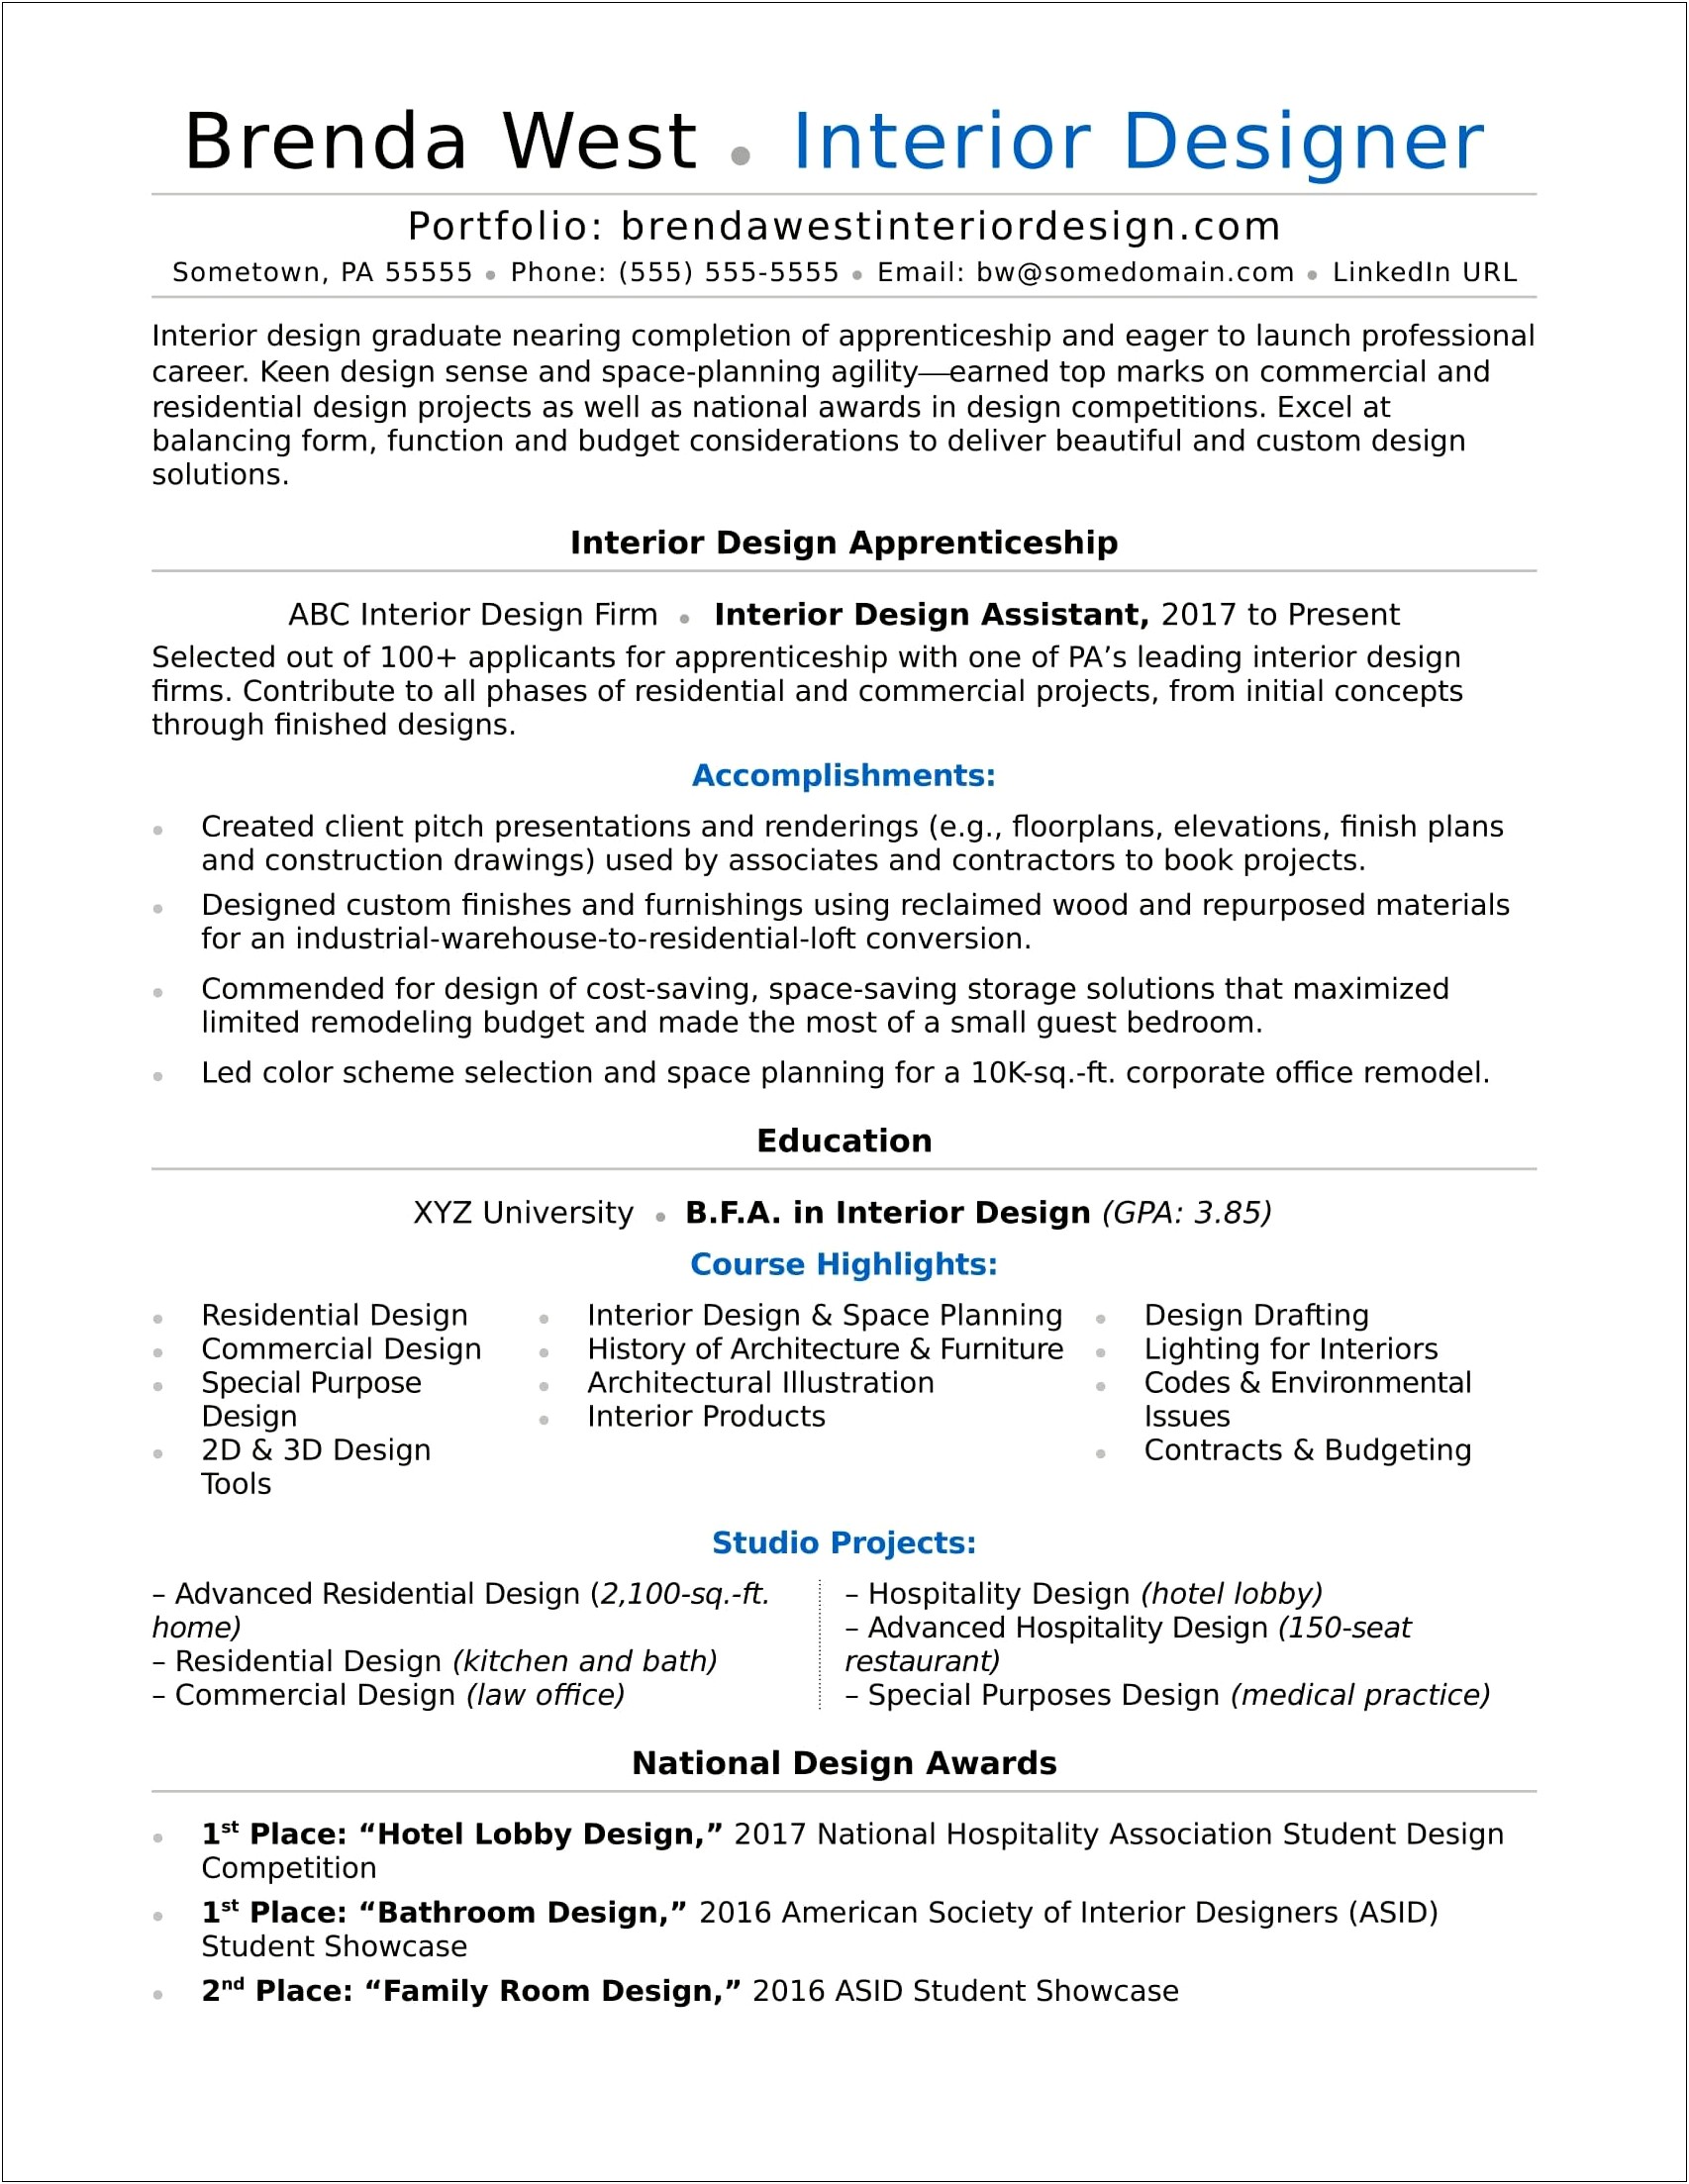 Resume For Student Residential Assistant Examples